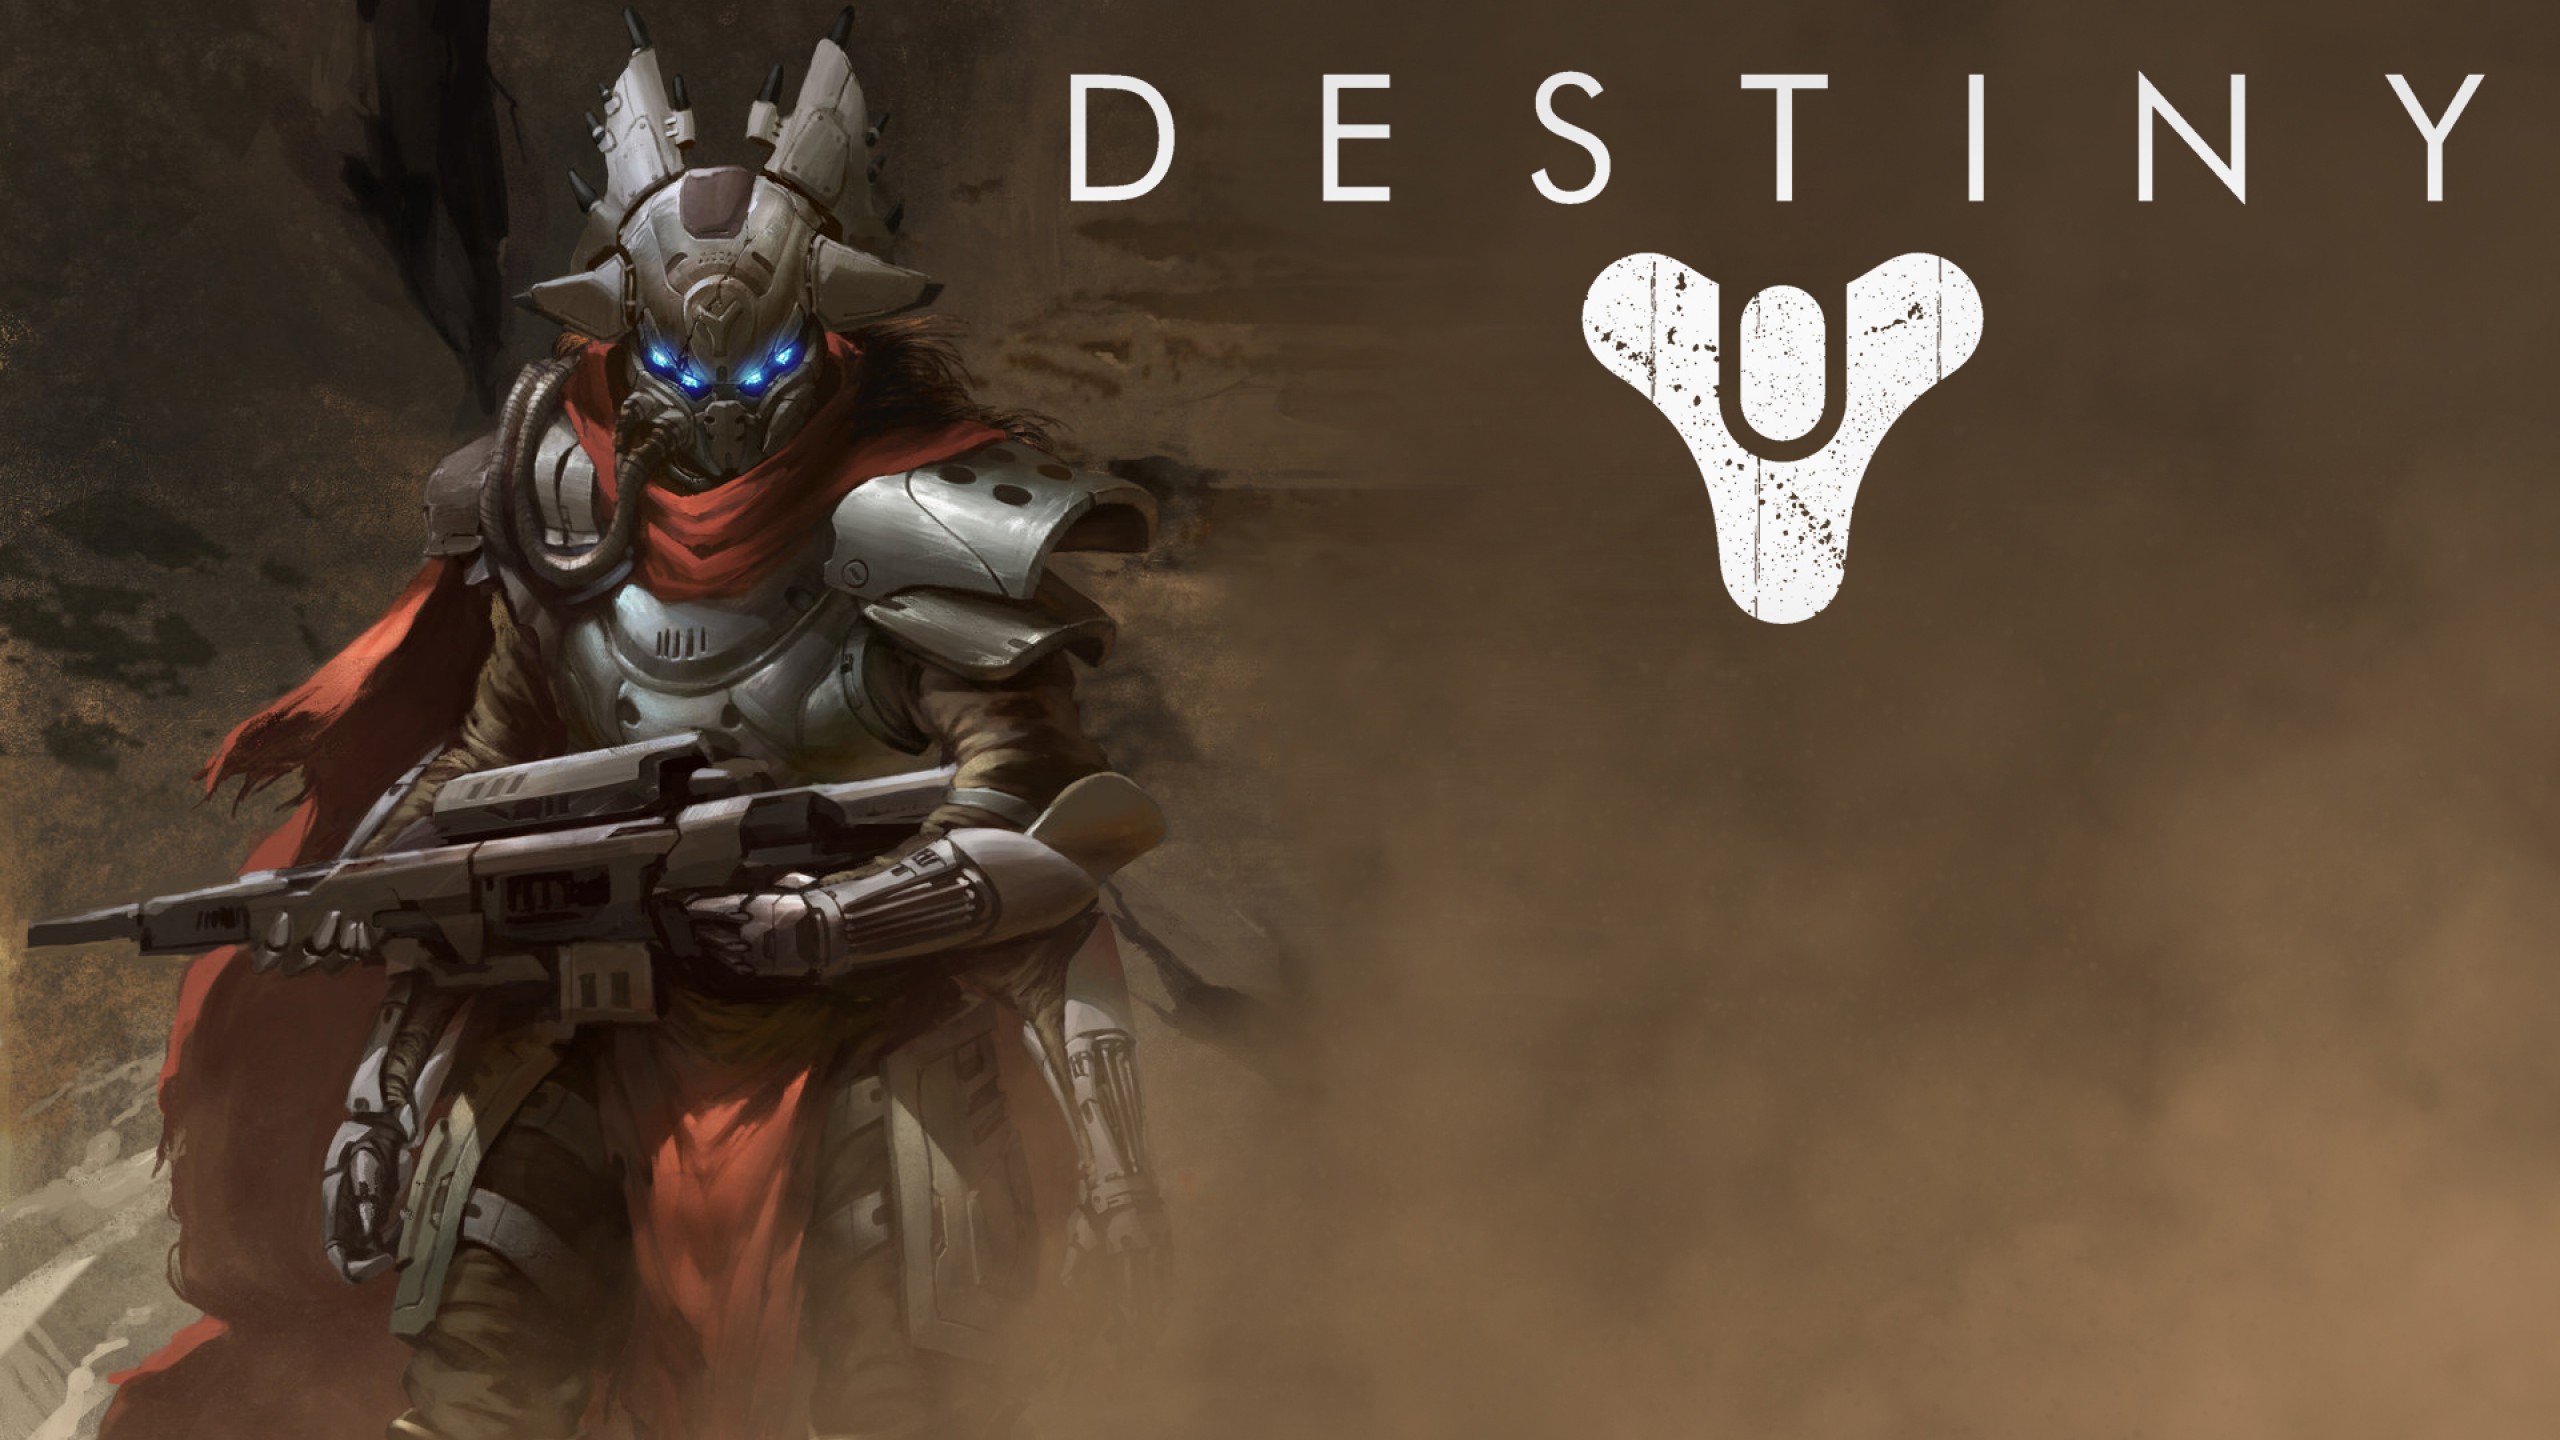 Destiny Game HD Wallpaper in High Resolution at Games Wallpaper